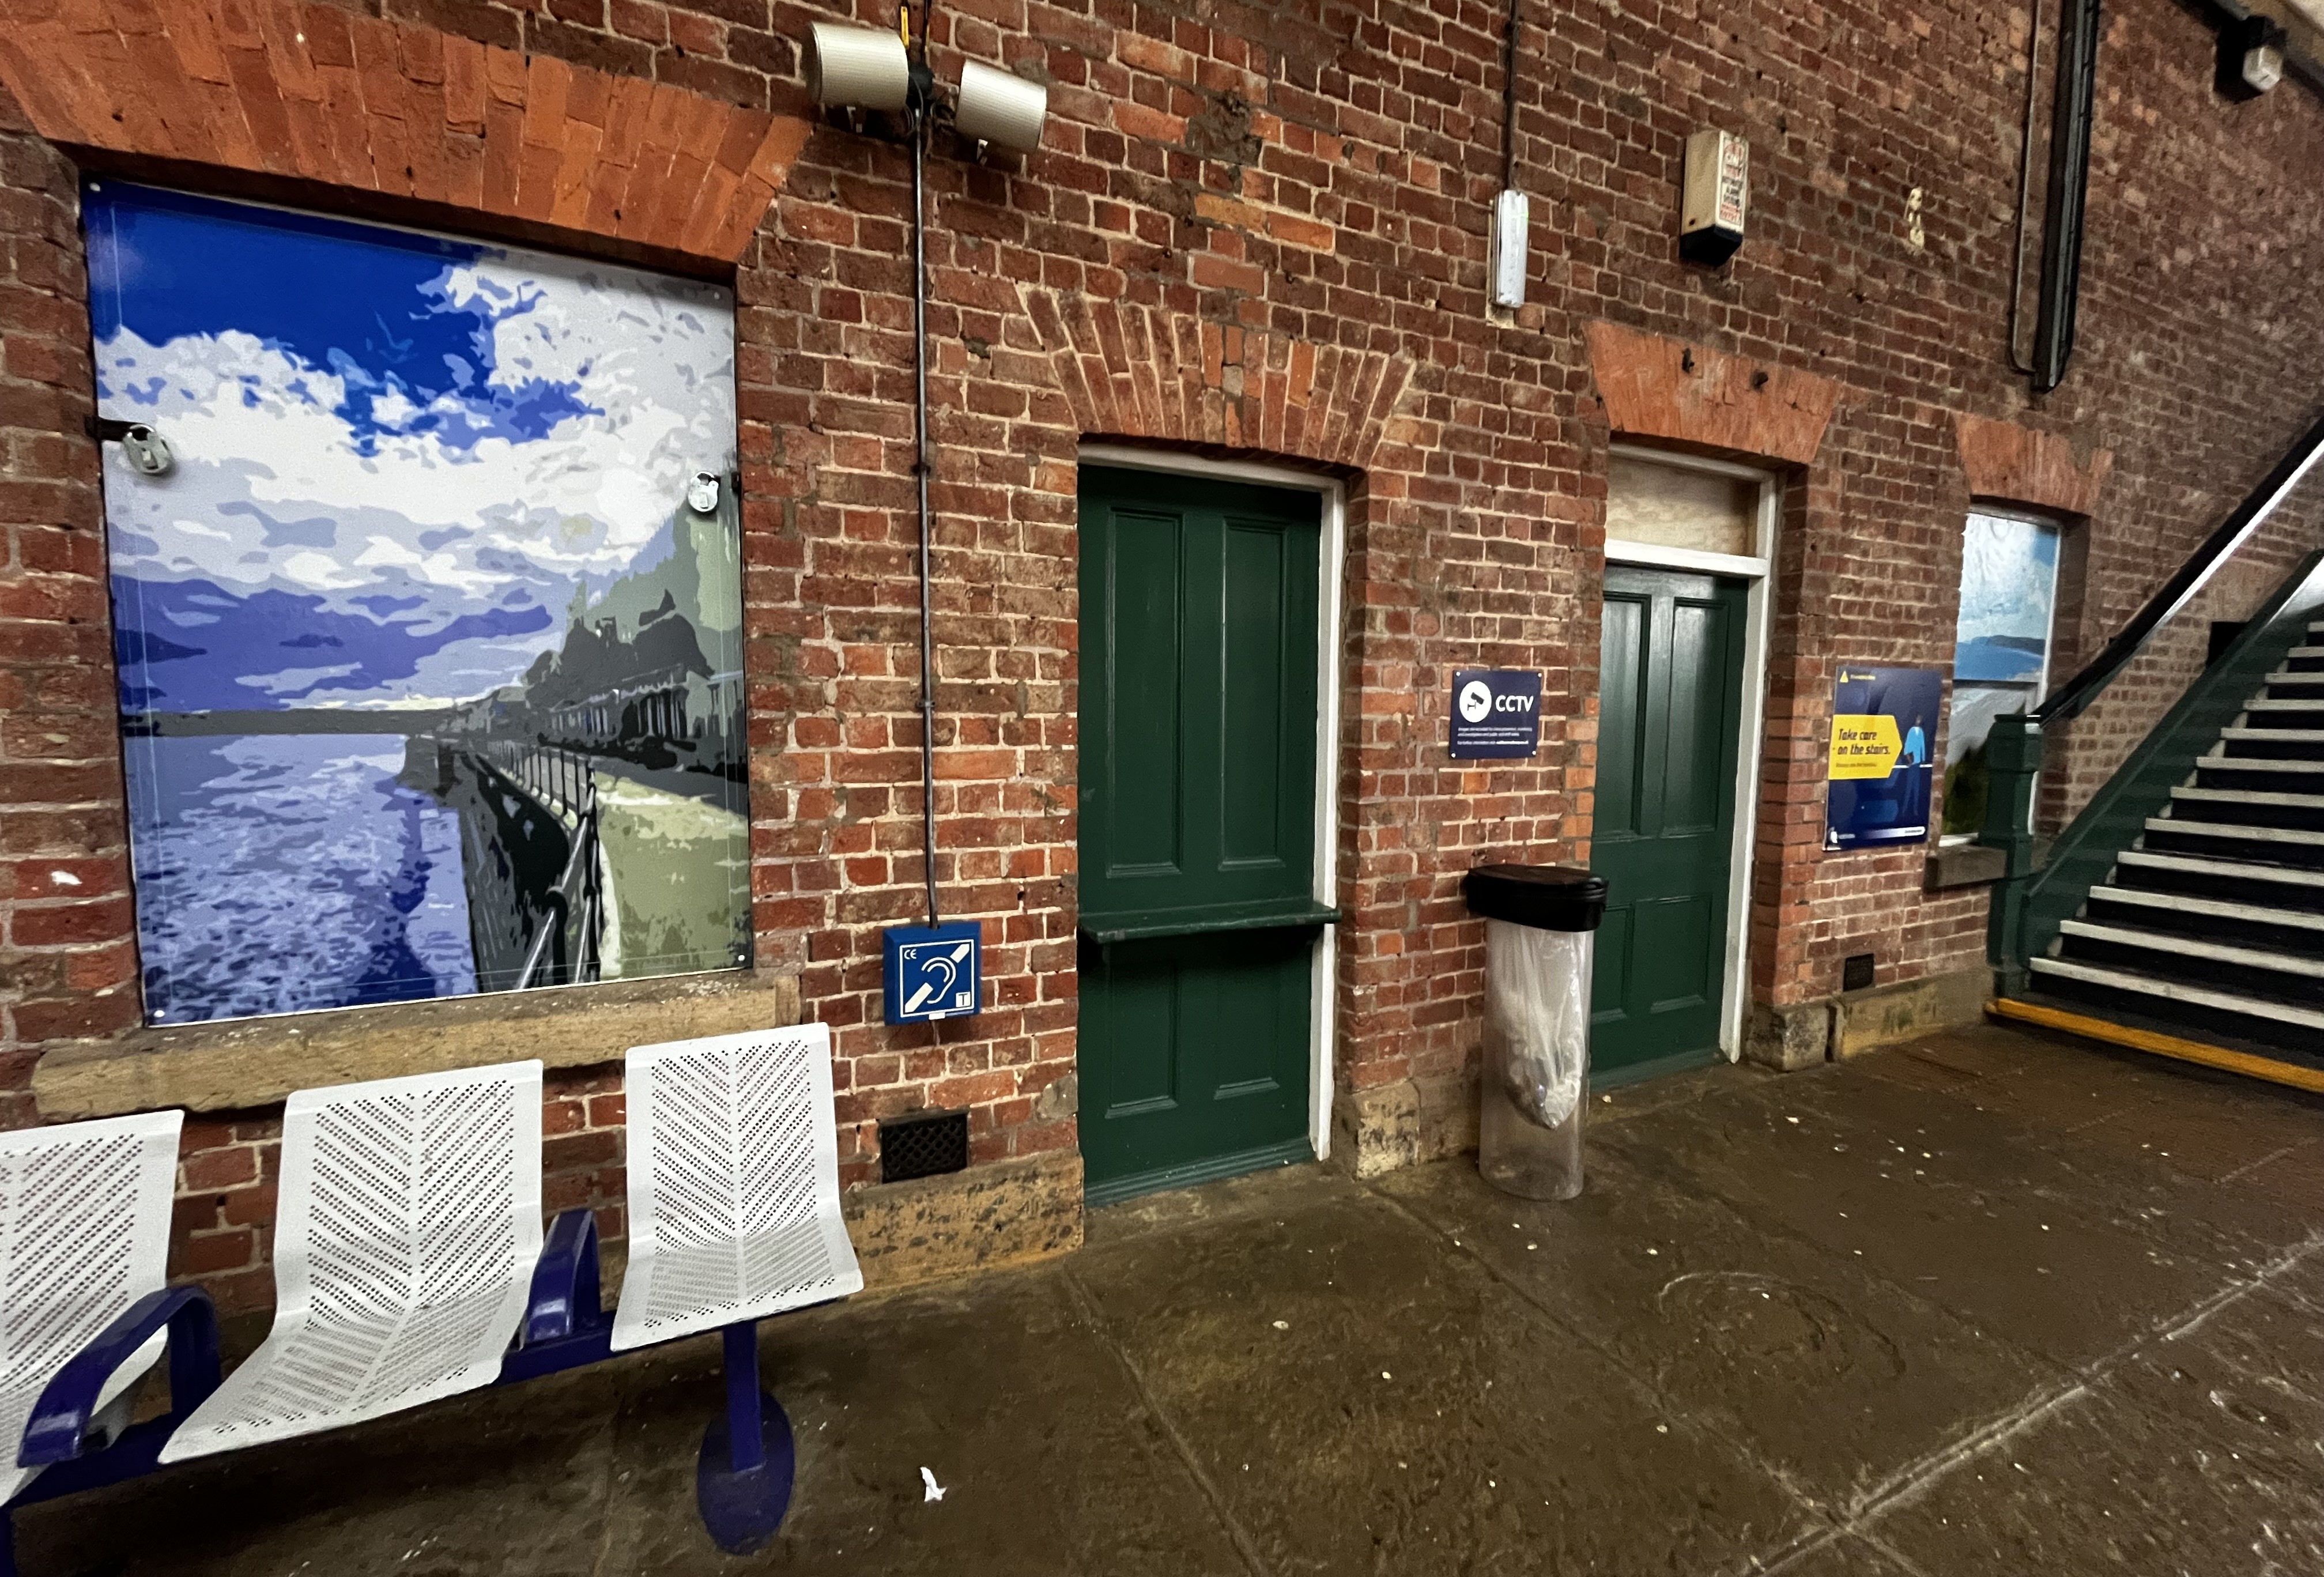 this-image-shows-some-of-the-artwork-at-filey-station